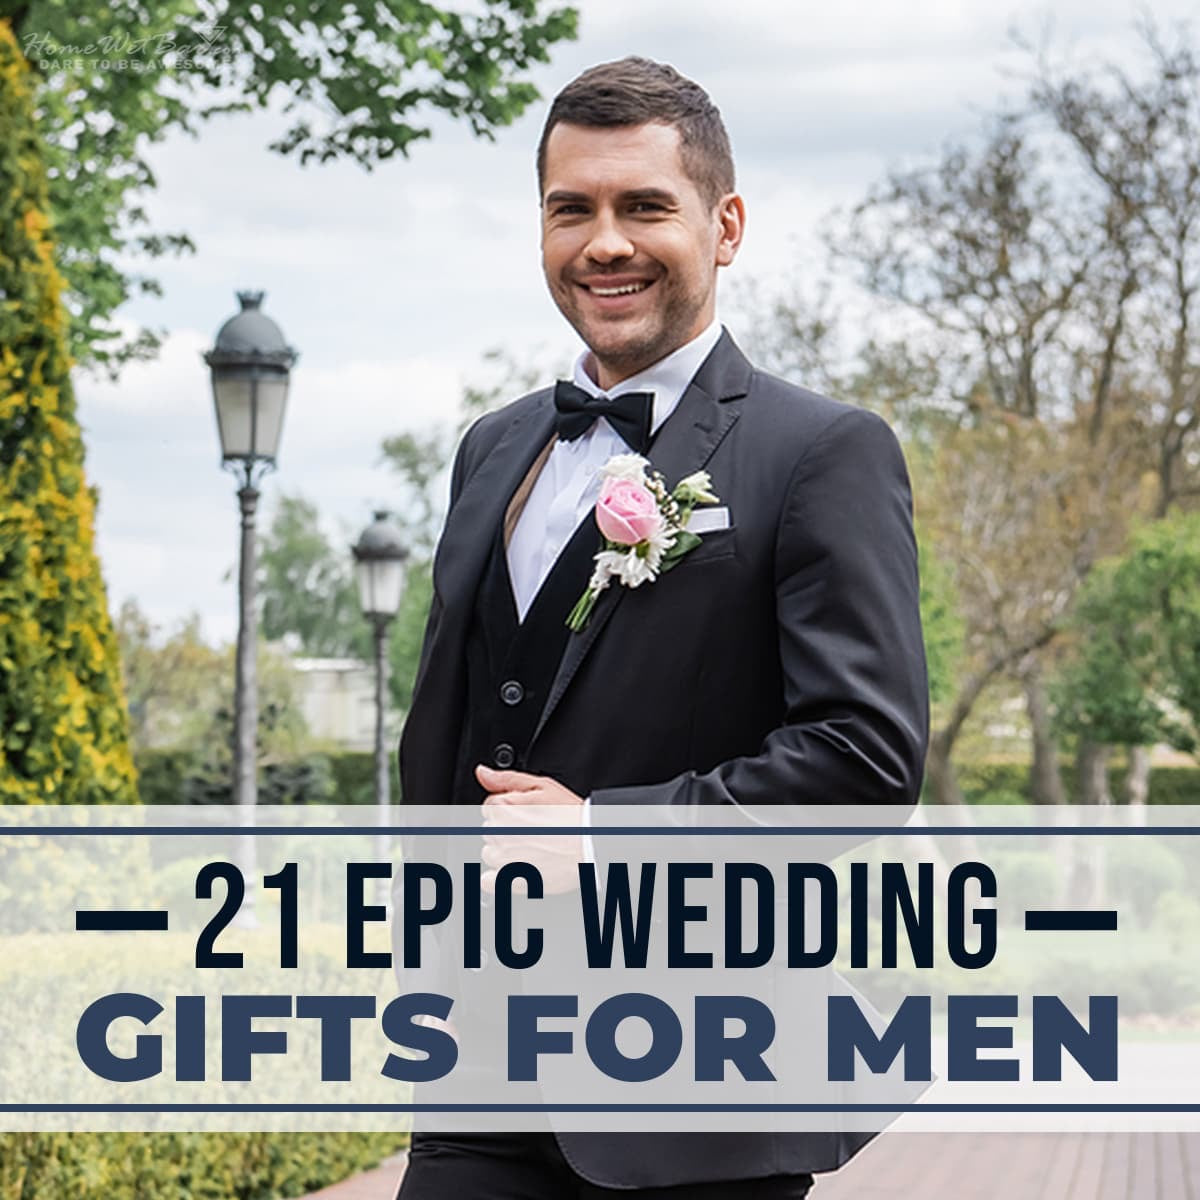 Buy Wedding Gift For Men - Marriage Gifting Ideas for Him - Zwende